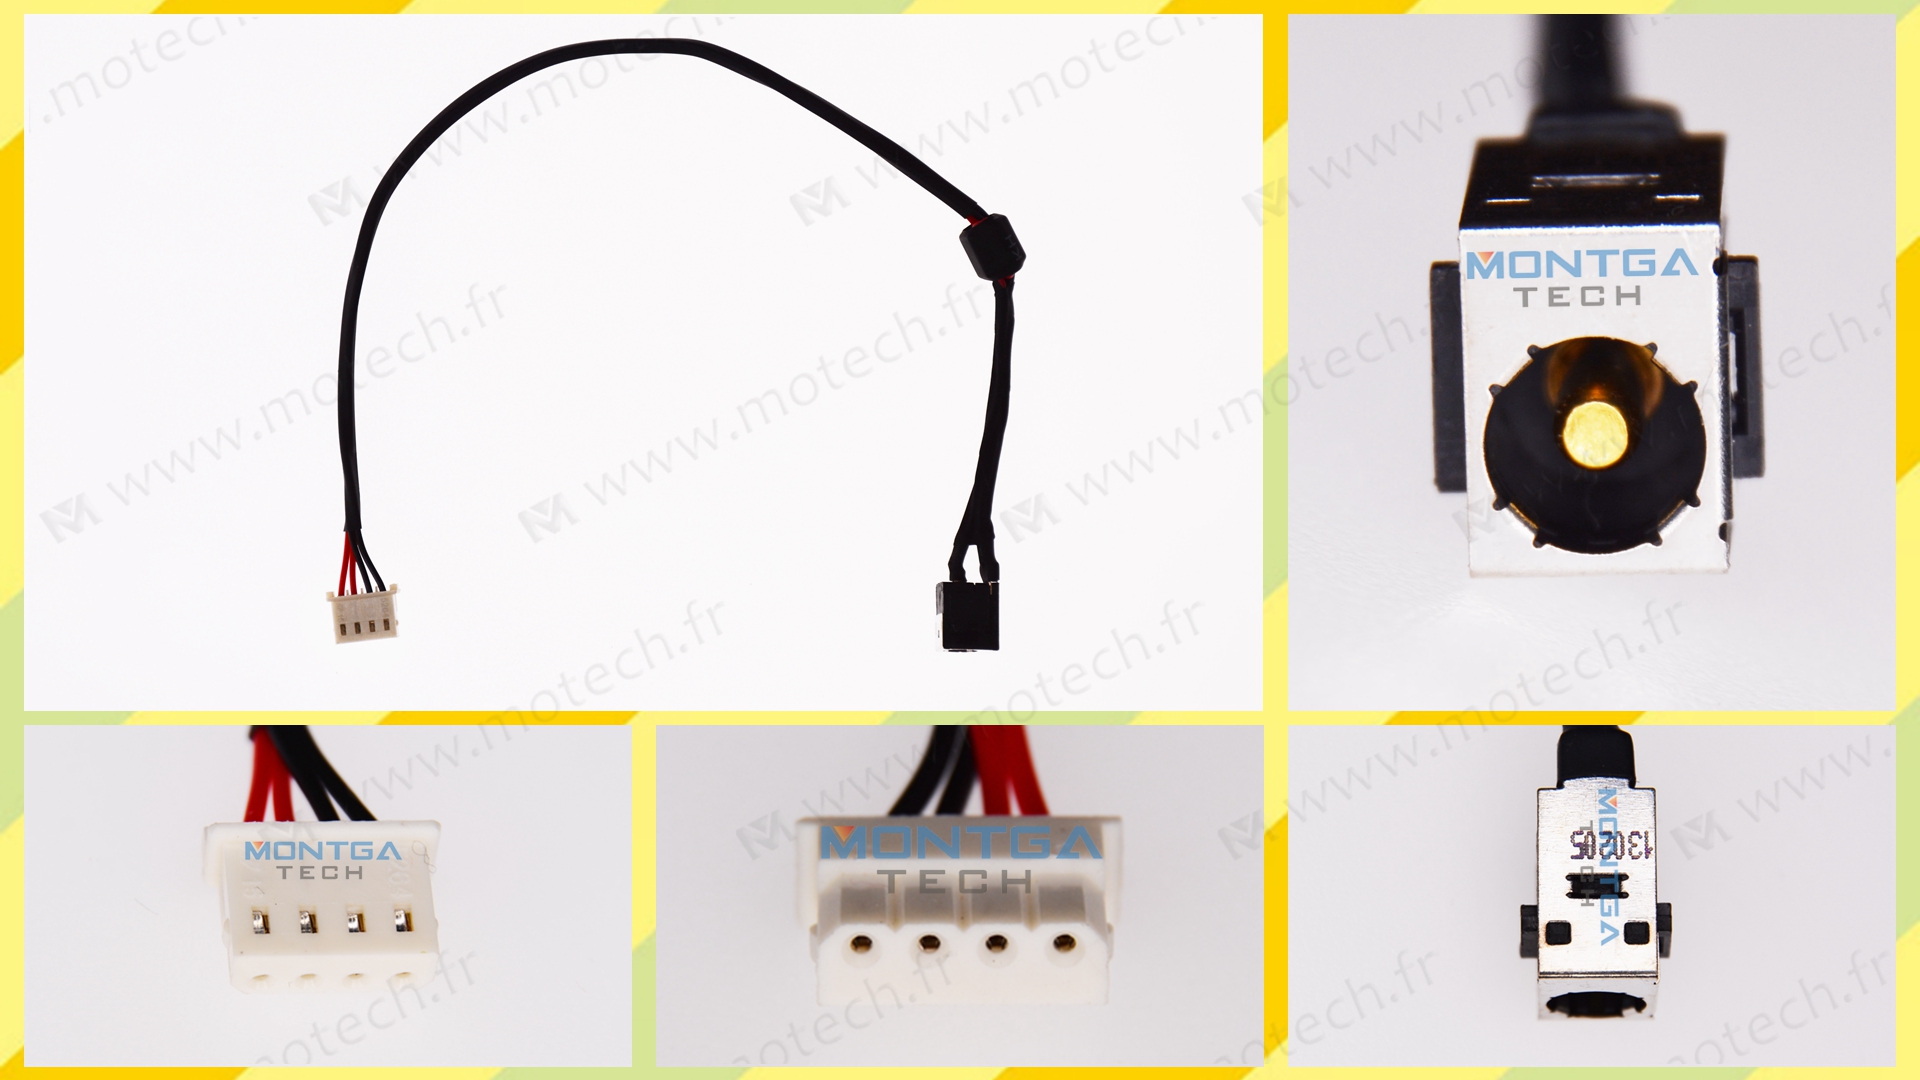 Toshiba L755 charging connector, Toshiba L755 DC Power Jack, Toshiba L755 DC IN Cable, Toshiba L755 Power Jack, Toshiba L755 plug, Toshiba L755 Jack socket, Toshiba L755 connecteur de charge, 